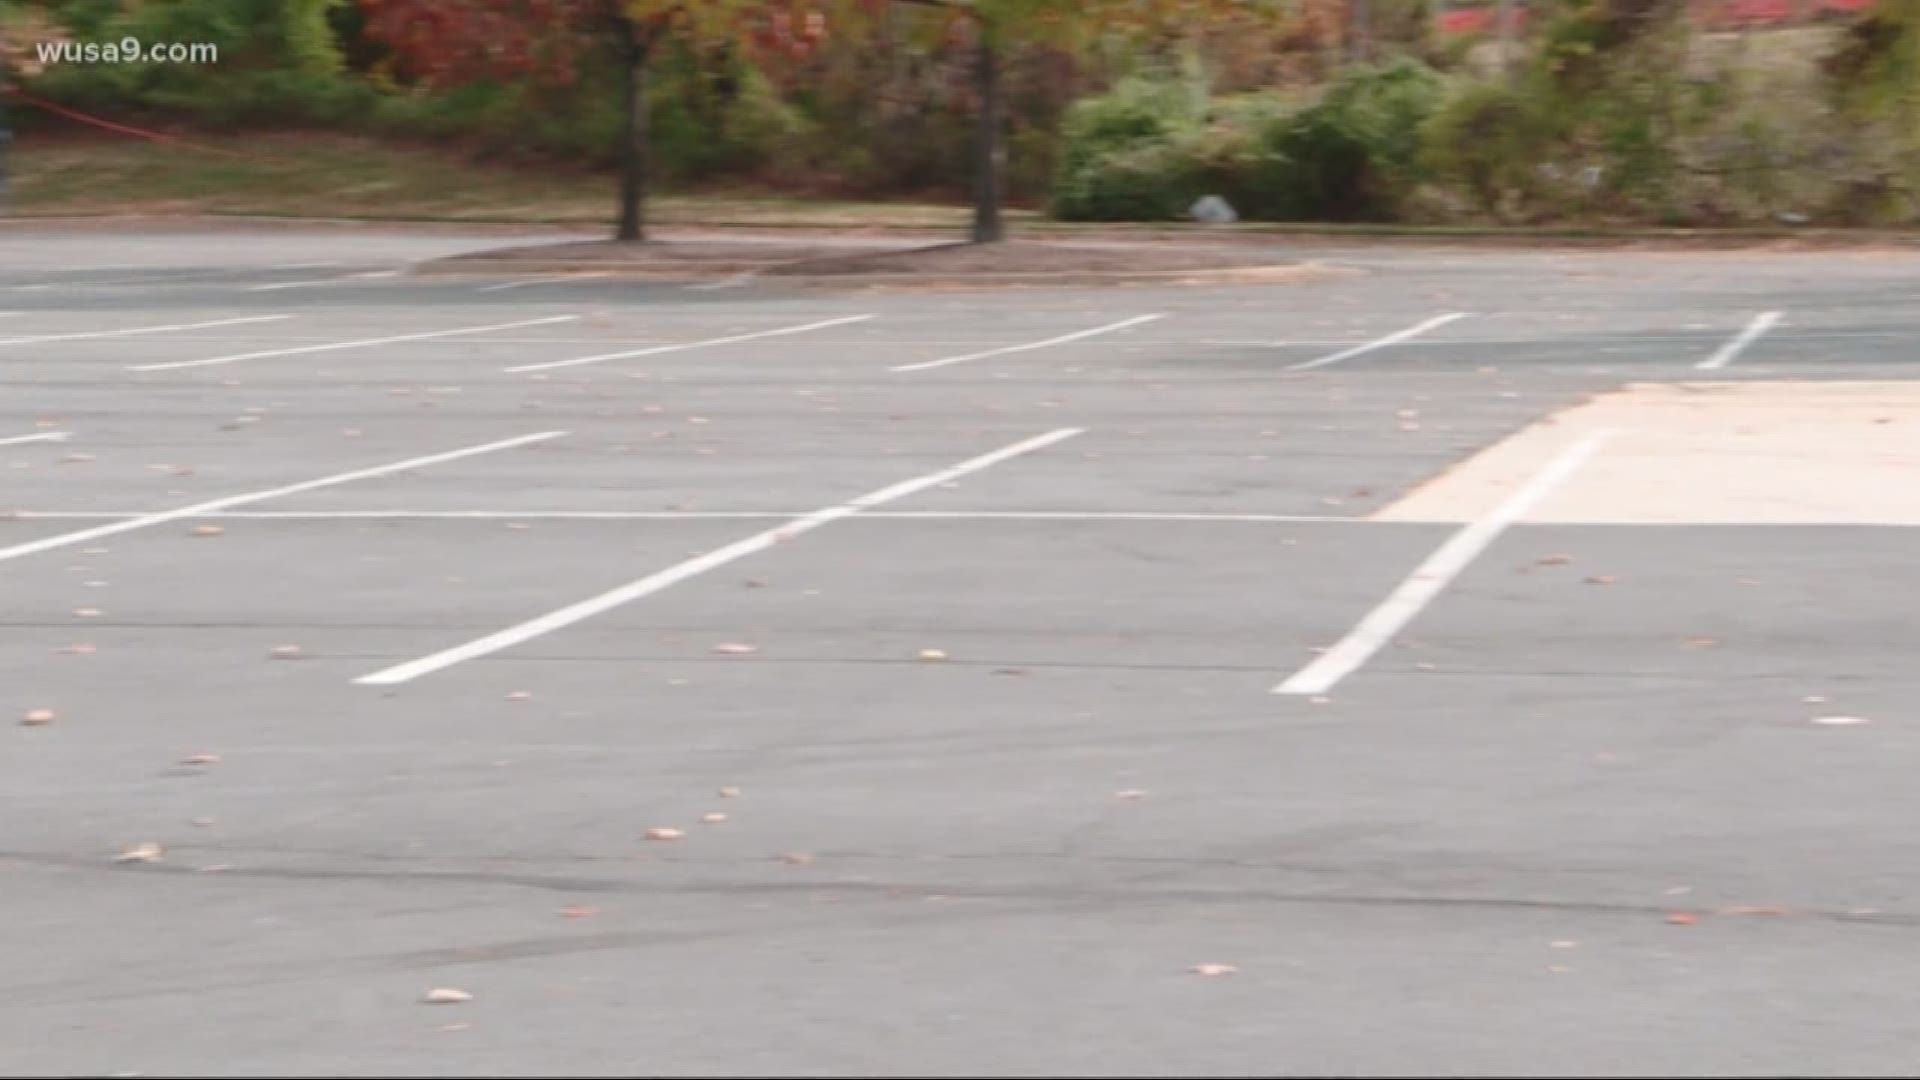 New plans for unused parking spaces at Fairfax County malls | wusa9.com